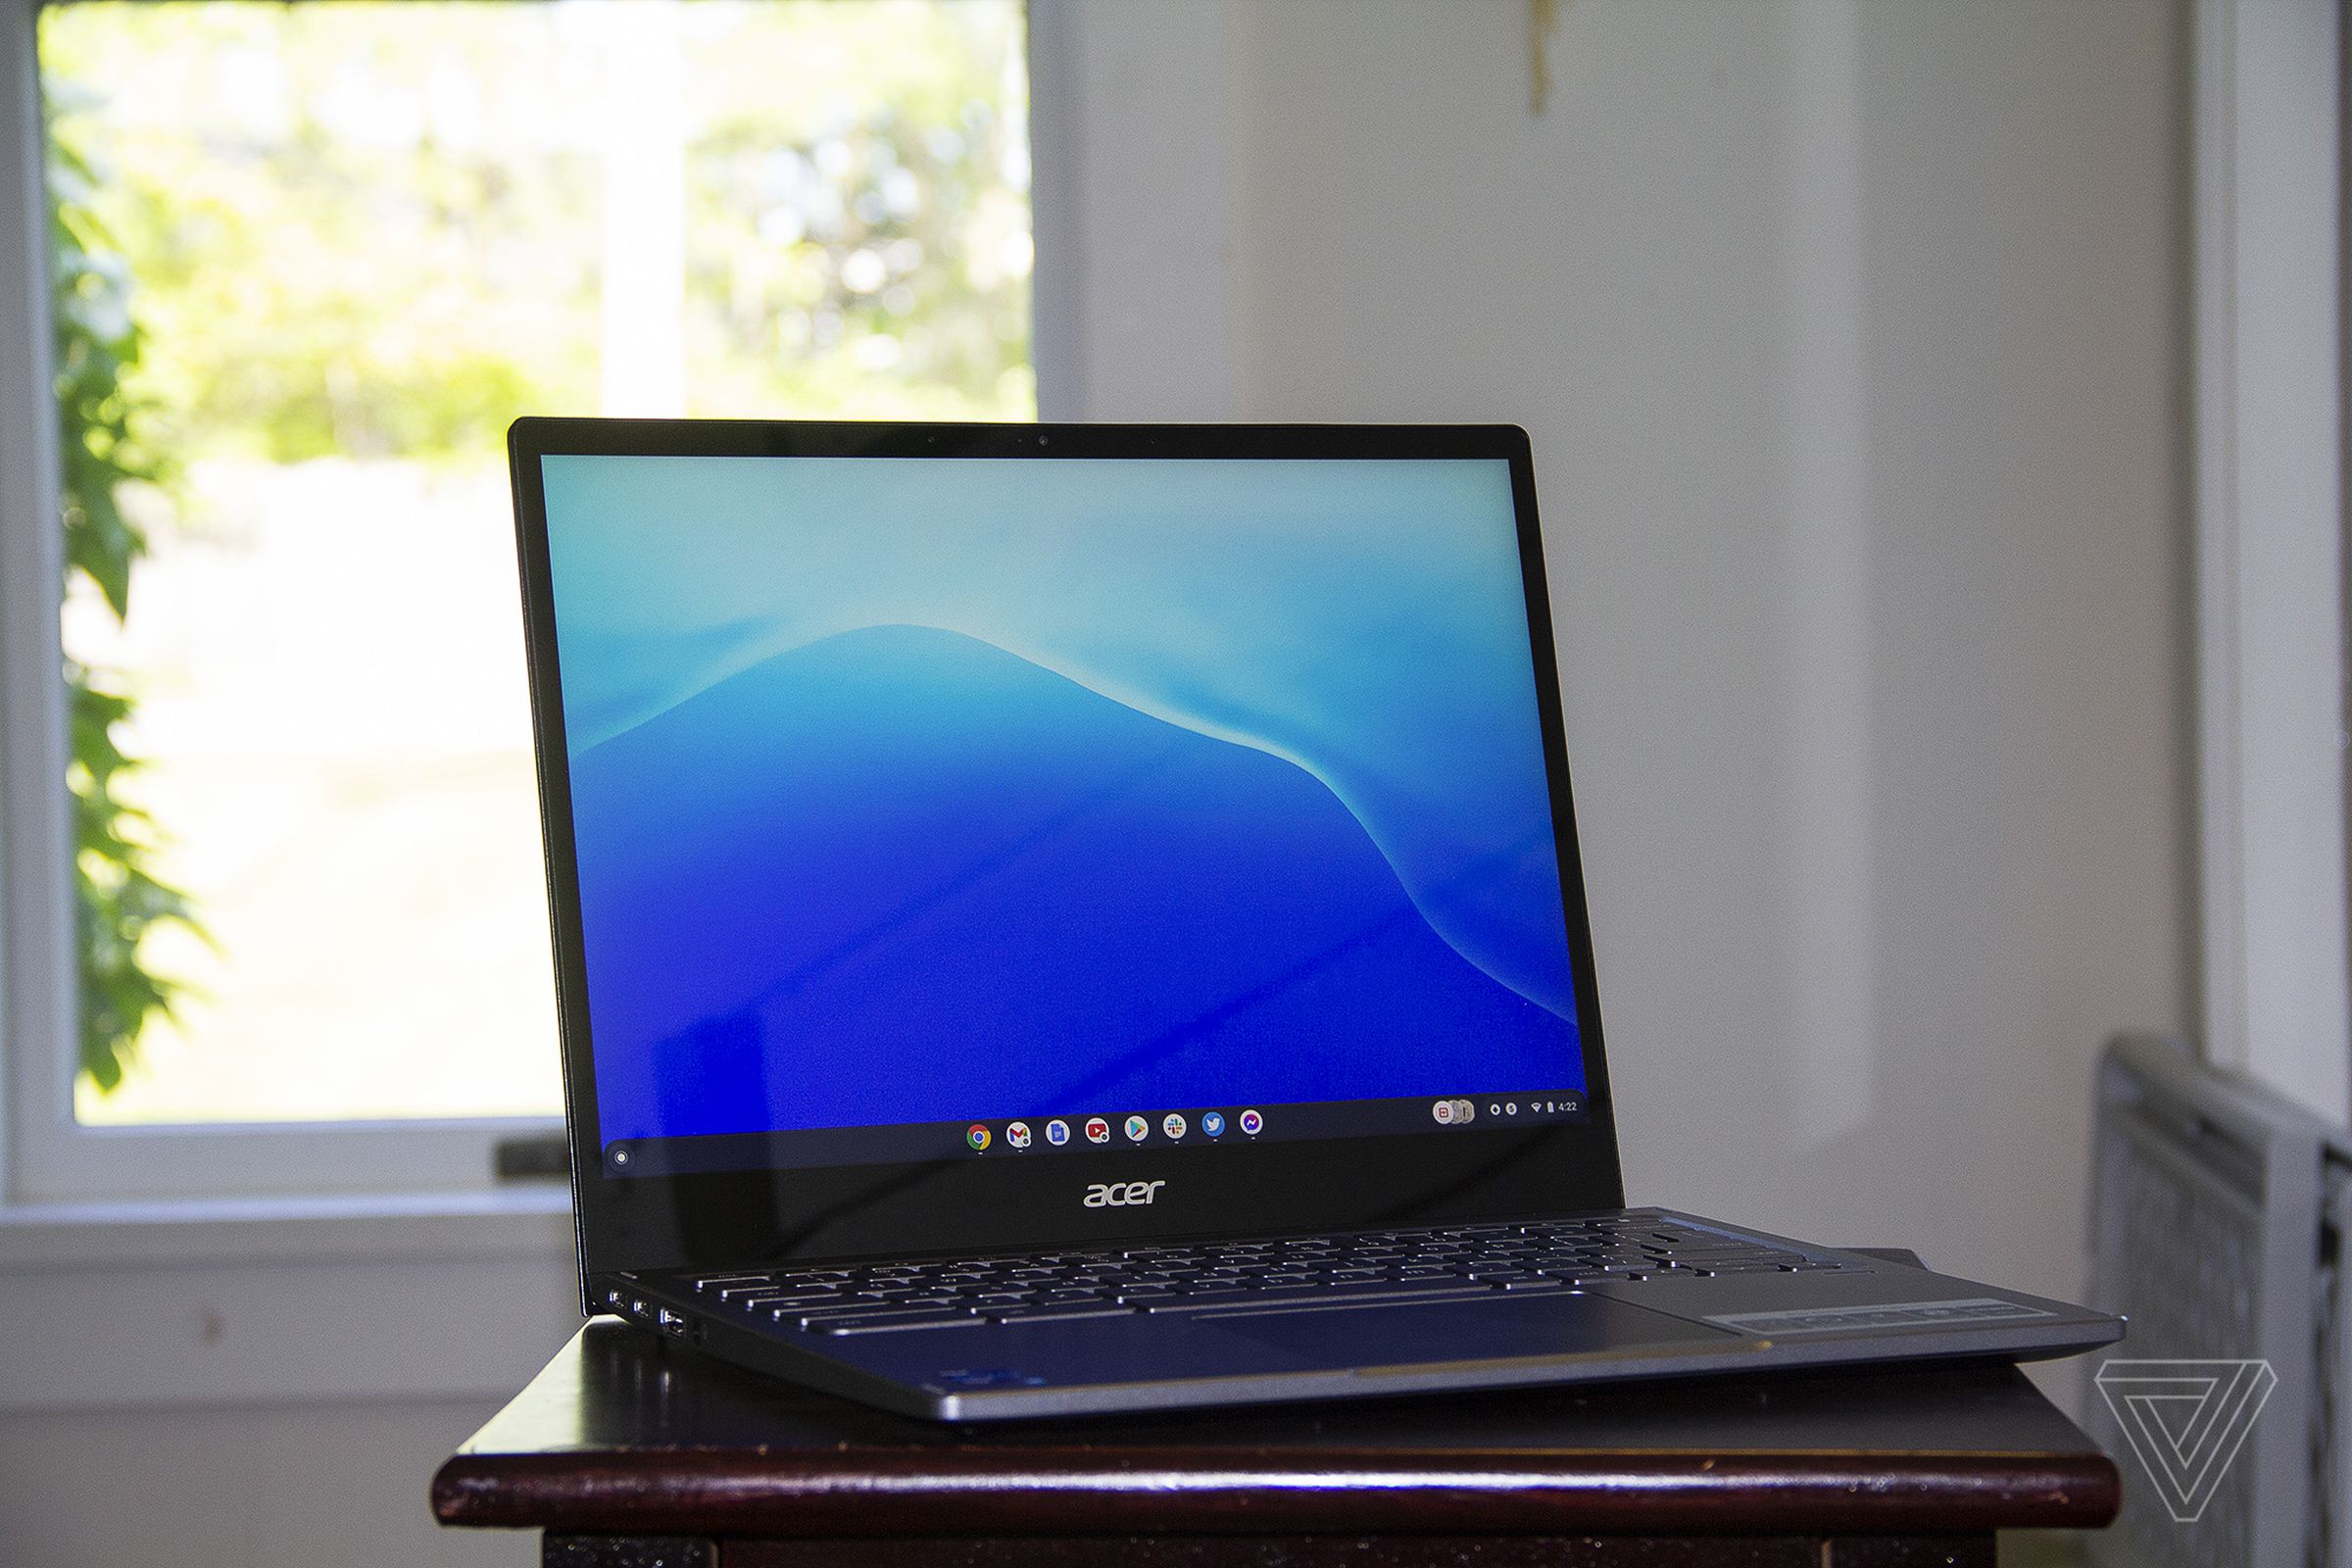 The Acer Chromebook Spin 713 open on a table angled to the right. The screen displays a blue background.